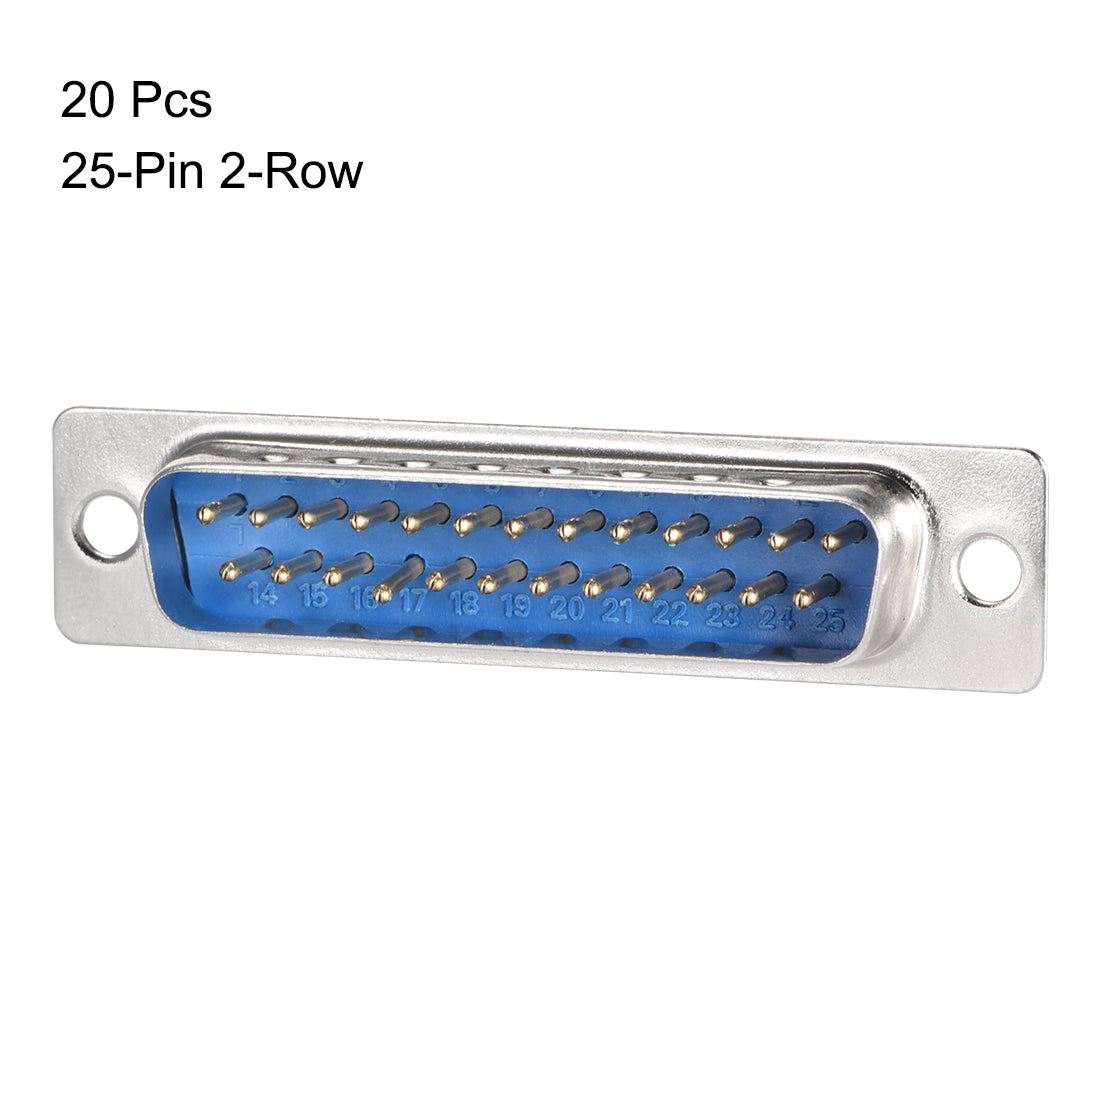 uxcell Uxcell D-sub Connector Male Plug 25-pin 2-row Port Terminal Breakout Solder Type for Mechanical Equipment CNC Computers Blue 20pcs